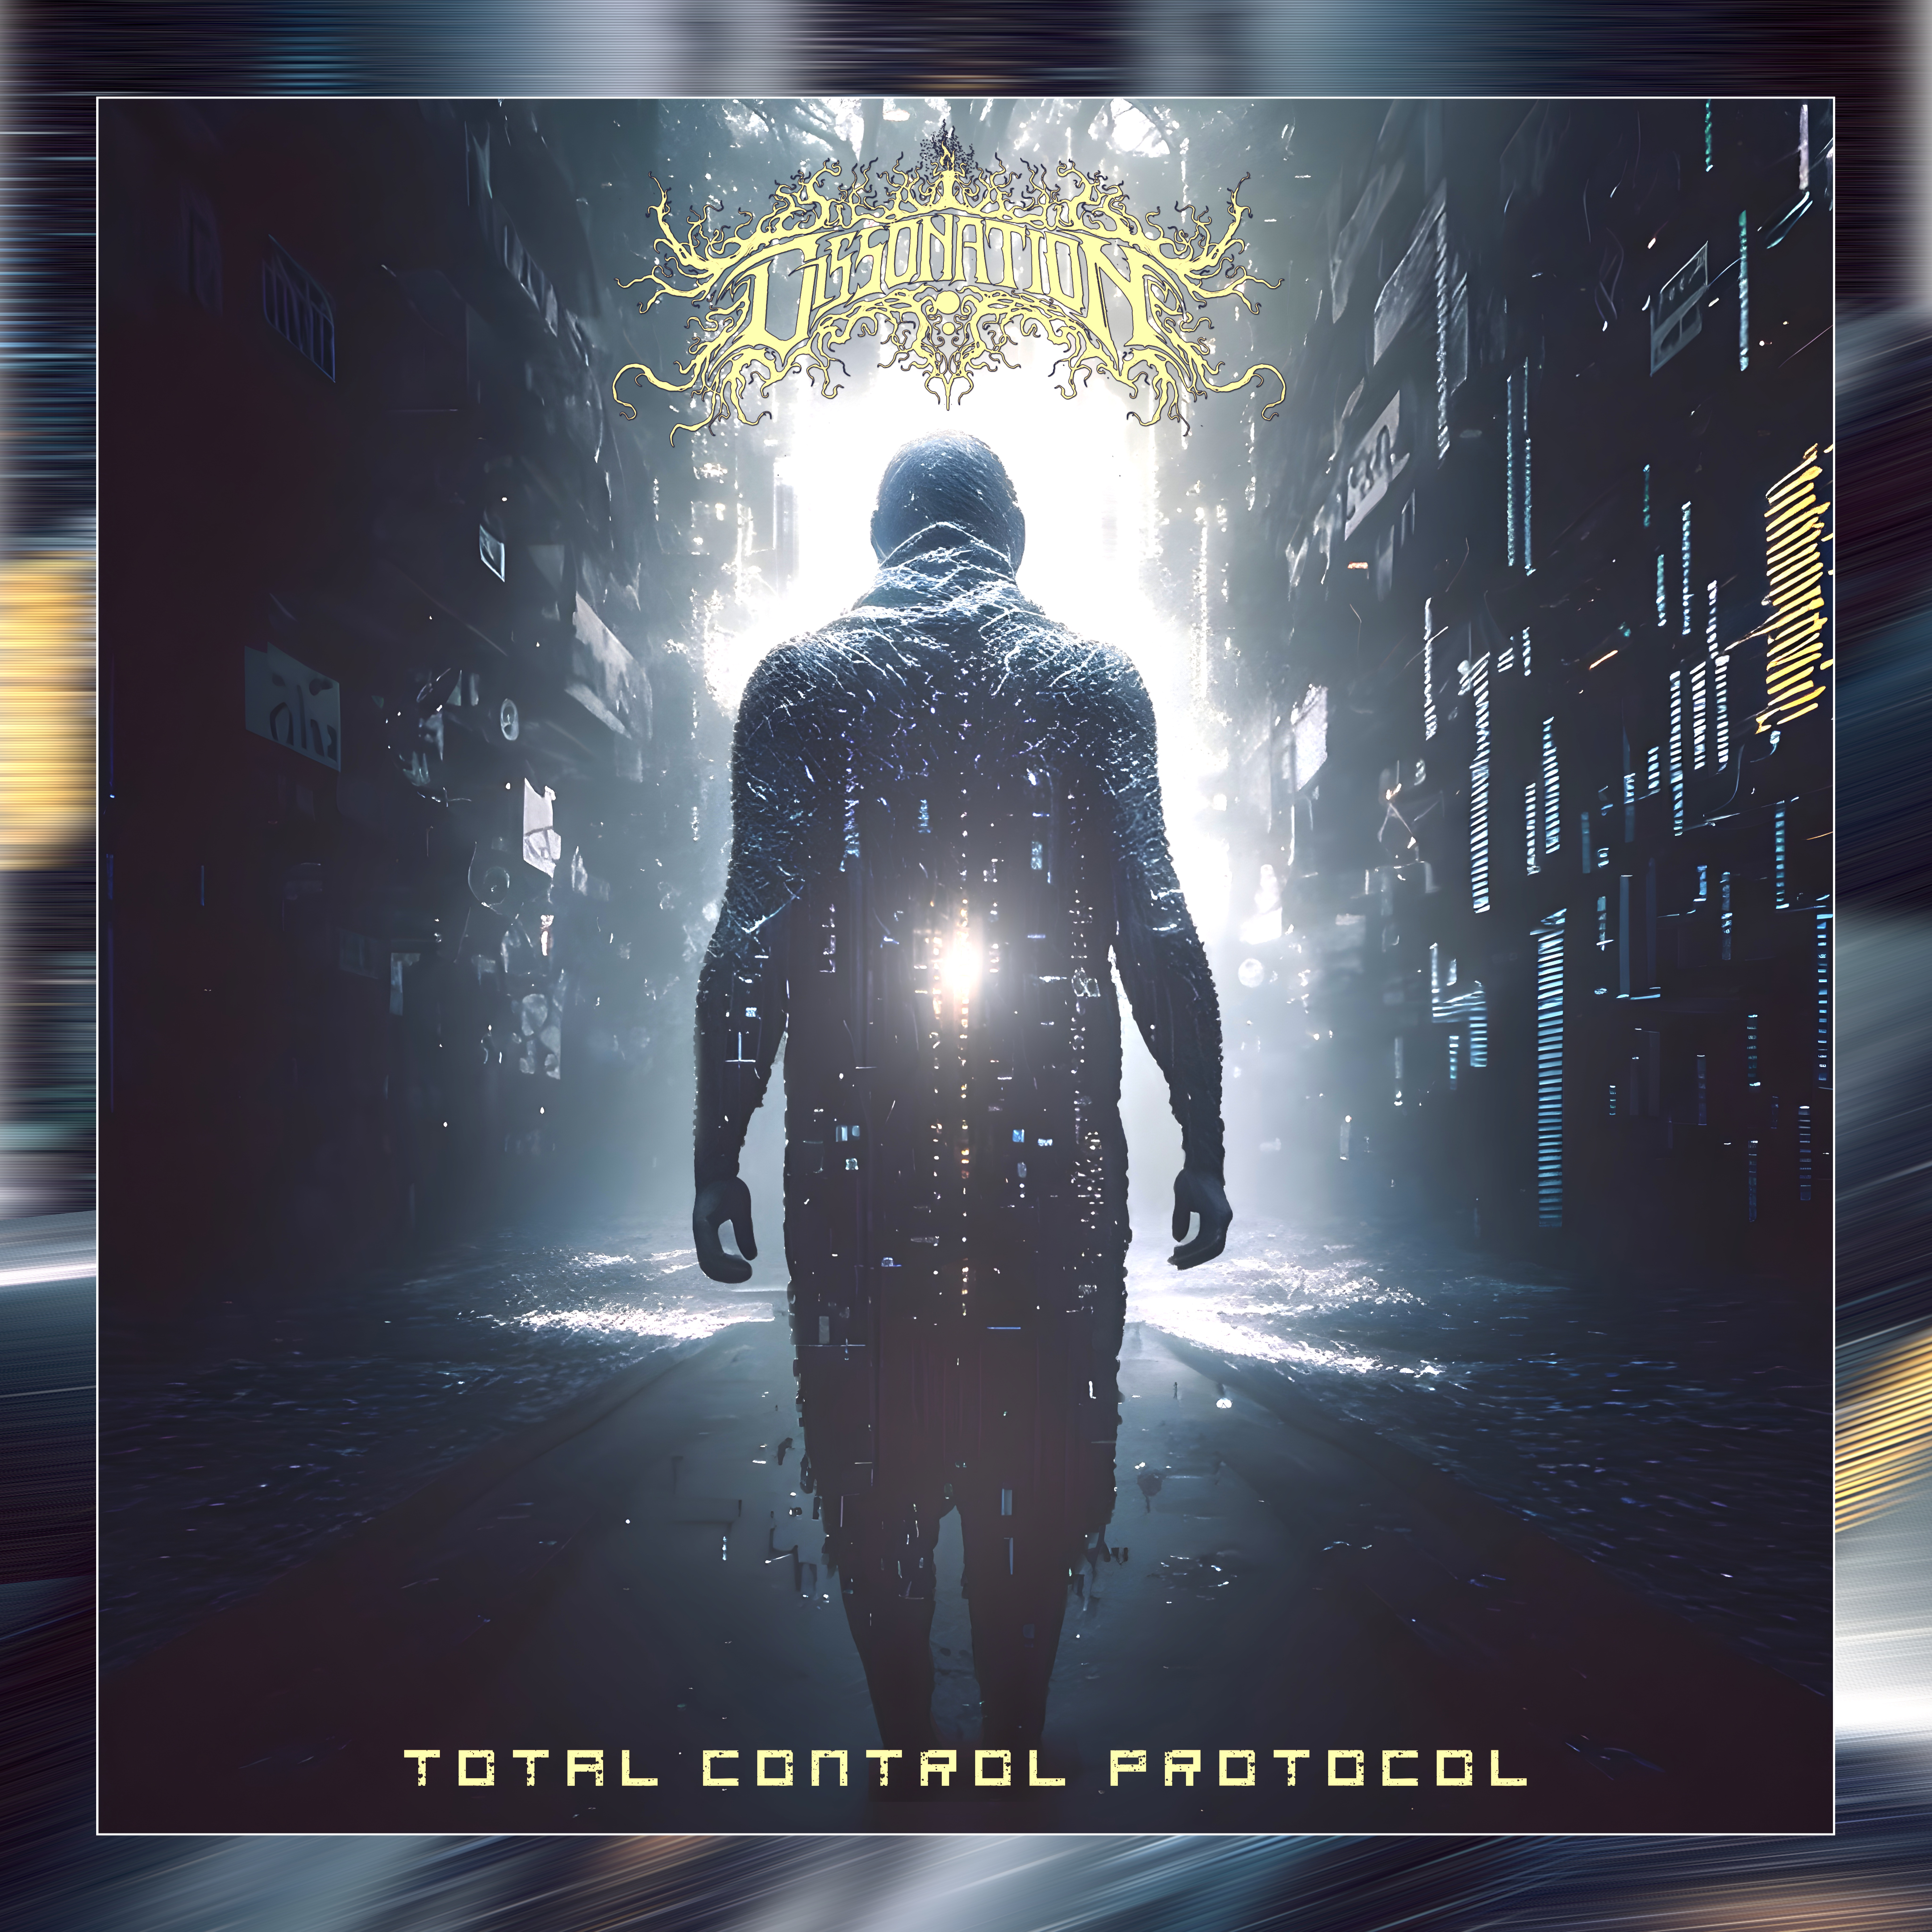 'Total Control Protocol feat. (Sammy Slamdance)' is out now!